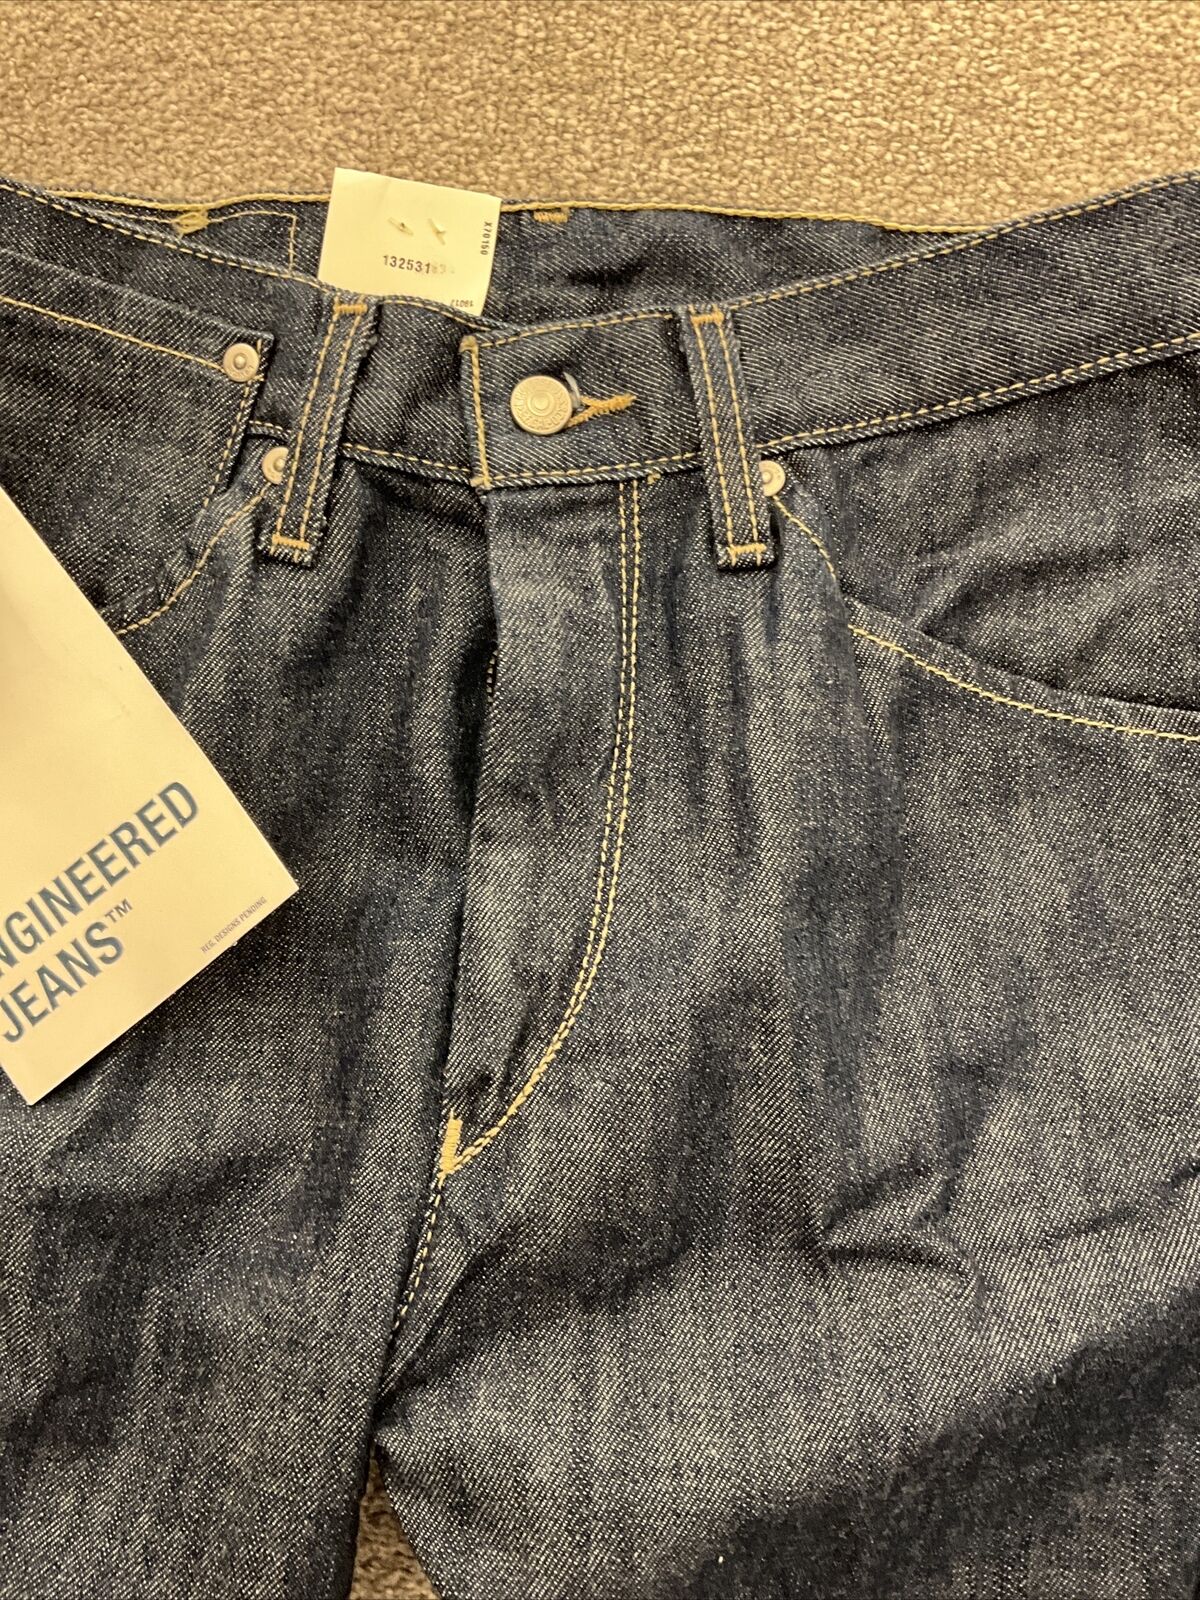 Levi’s Engineered Twisted Jeans. Vintage New Stock With Tags | eBay